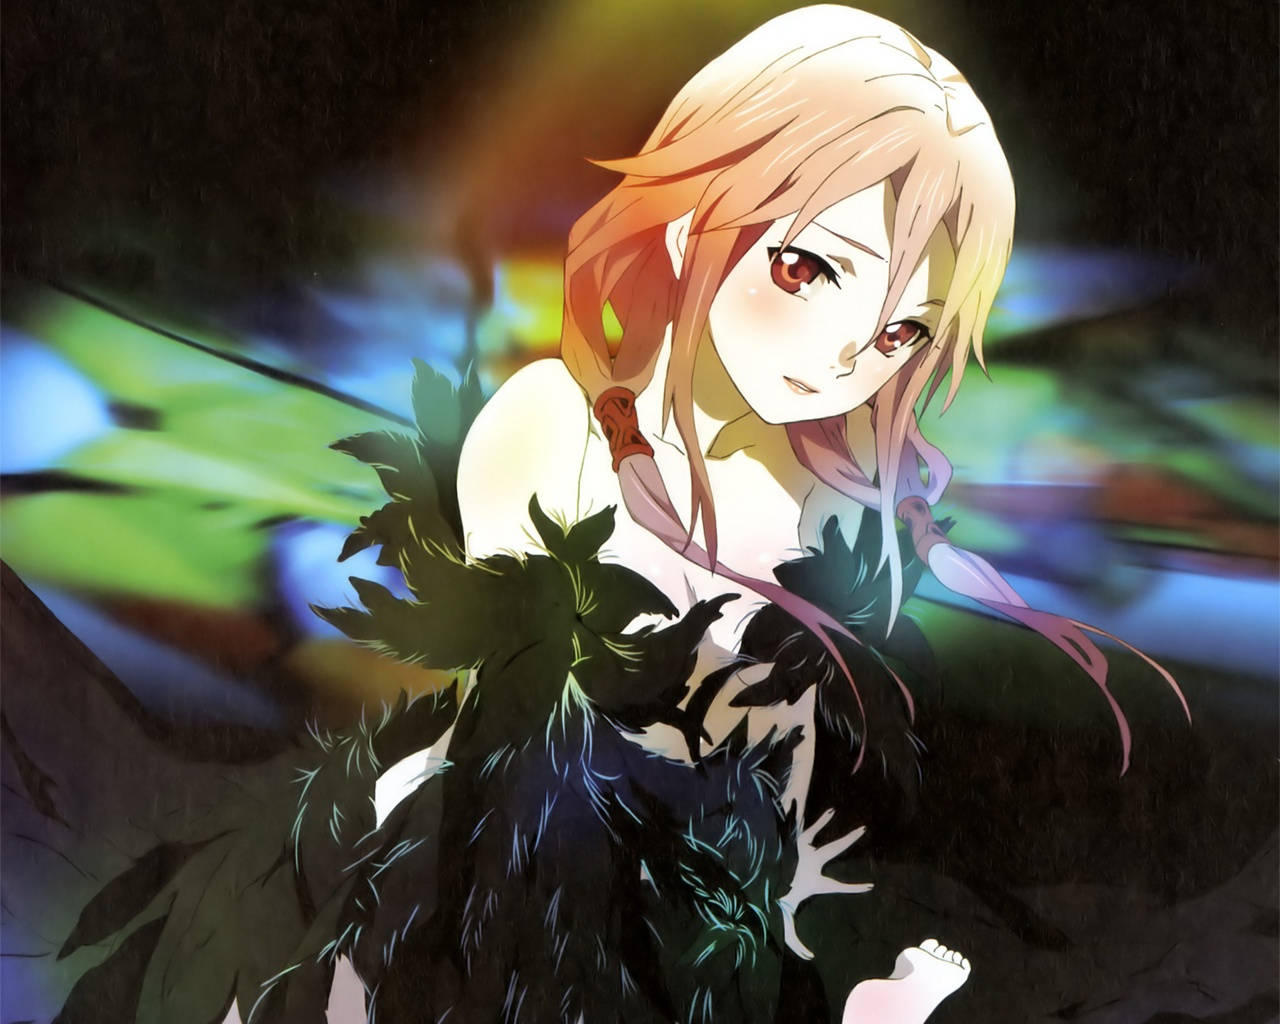 Anime Wallpapers 24h: GUILTY CROWN ANIME WALLPAPERS (8 IMAGENES)